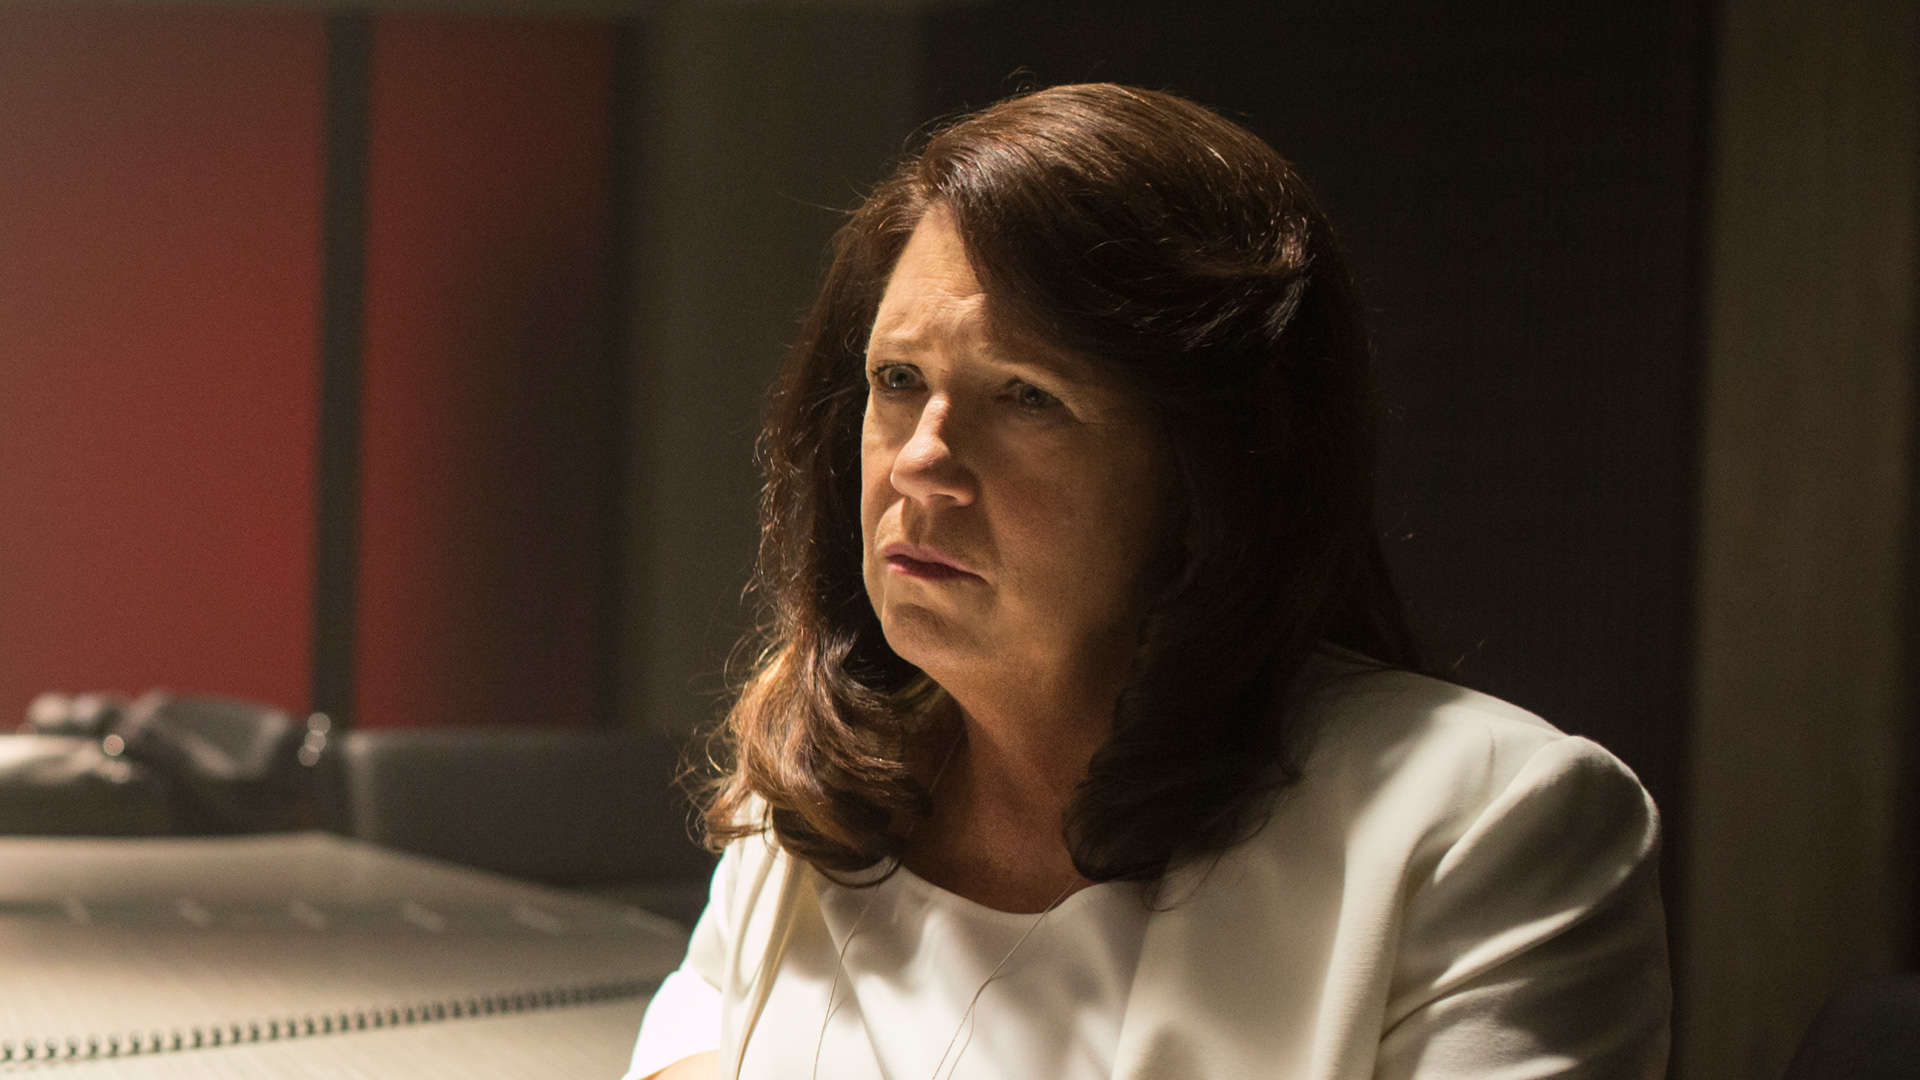 Ann Dowd Unpacks 'The Leftovers' and 'The Handmaid's Tale'